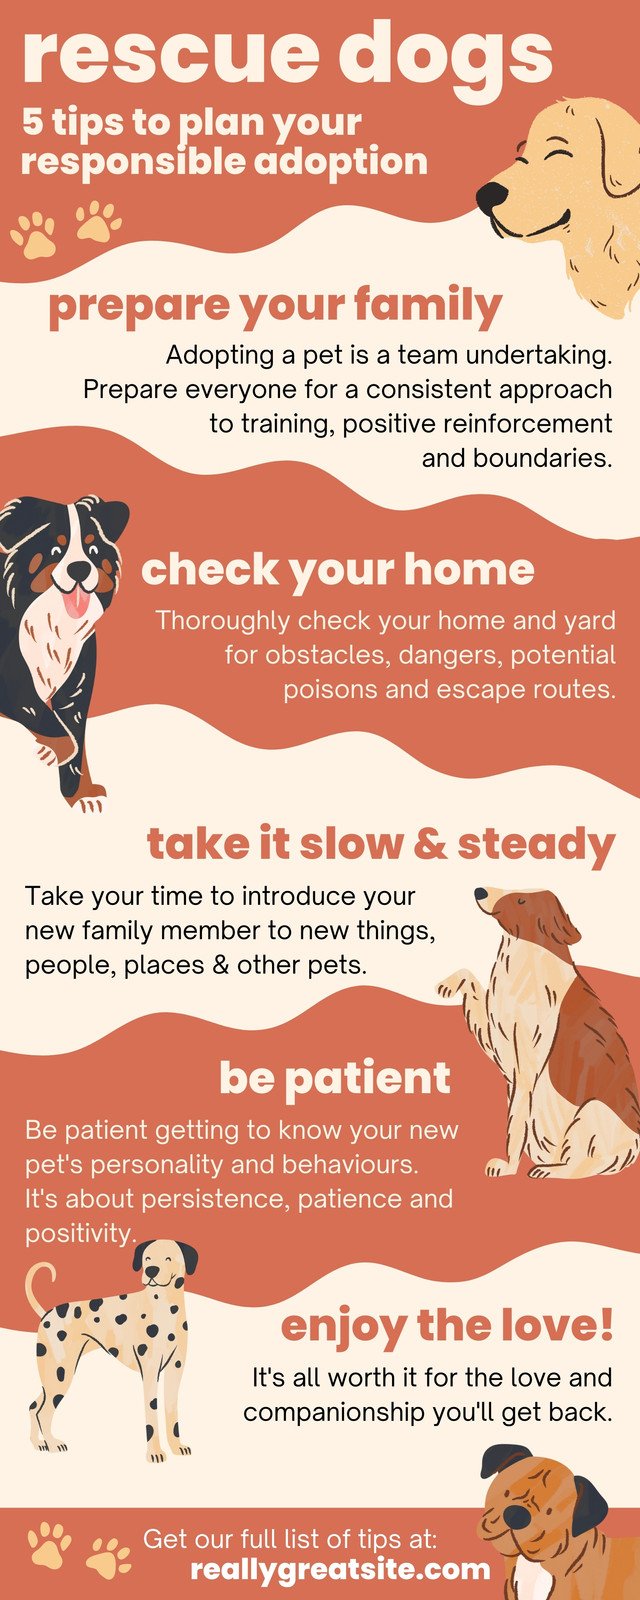 Canva Cute Brown   Beige Illustrated Rescue Dogs Adoption Tips List Infographic LuJ294EiFbs 